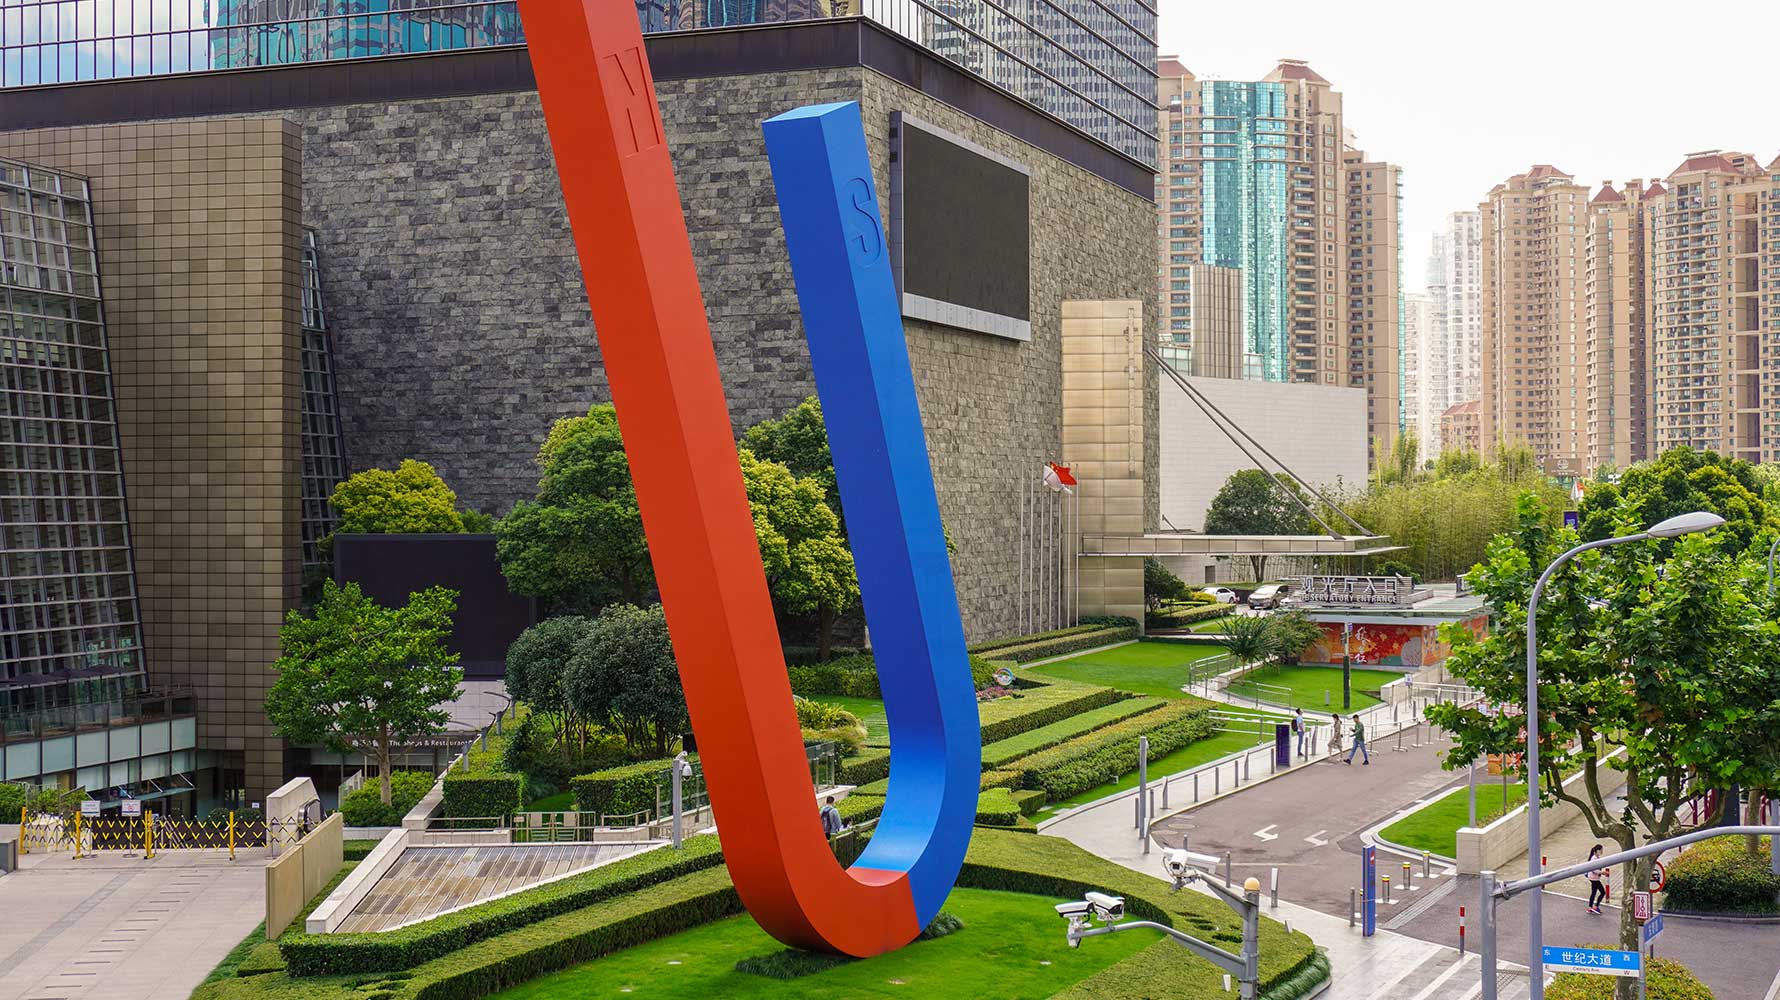 A large magnet sculpture placed on a lawn in front of an office building. 